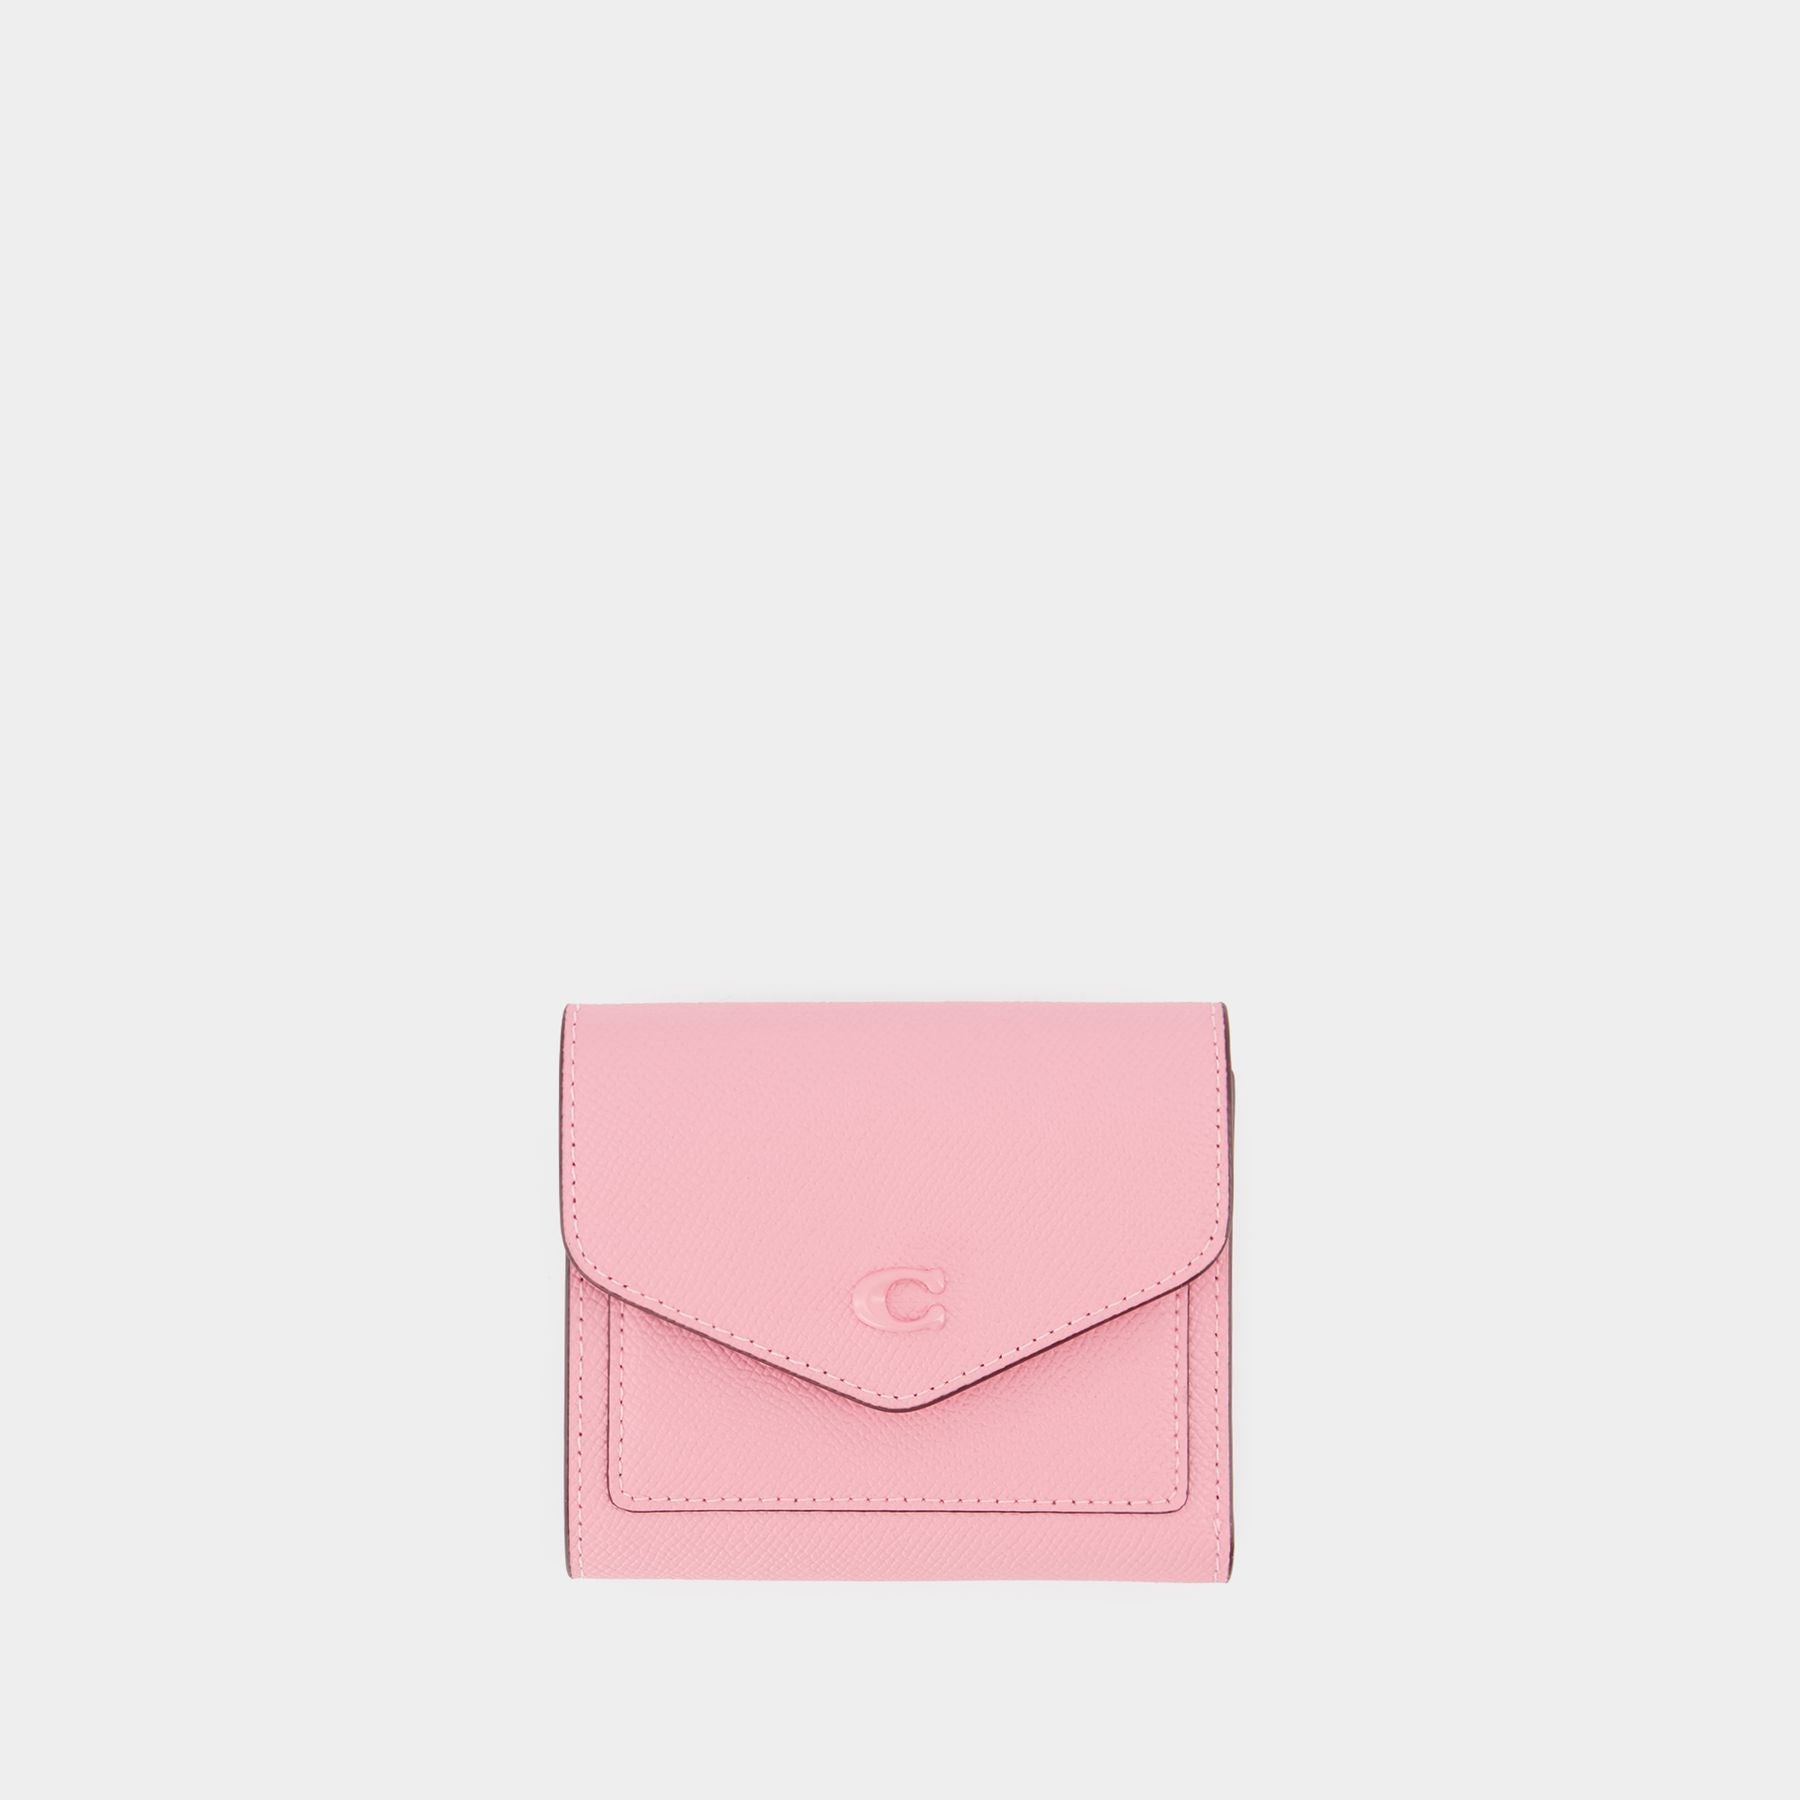 COACH Small Leather Wristlet in Pink